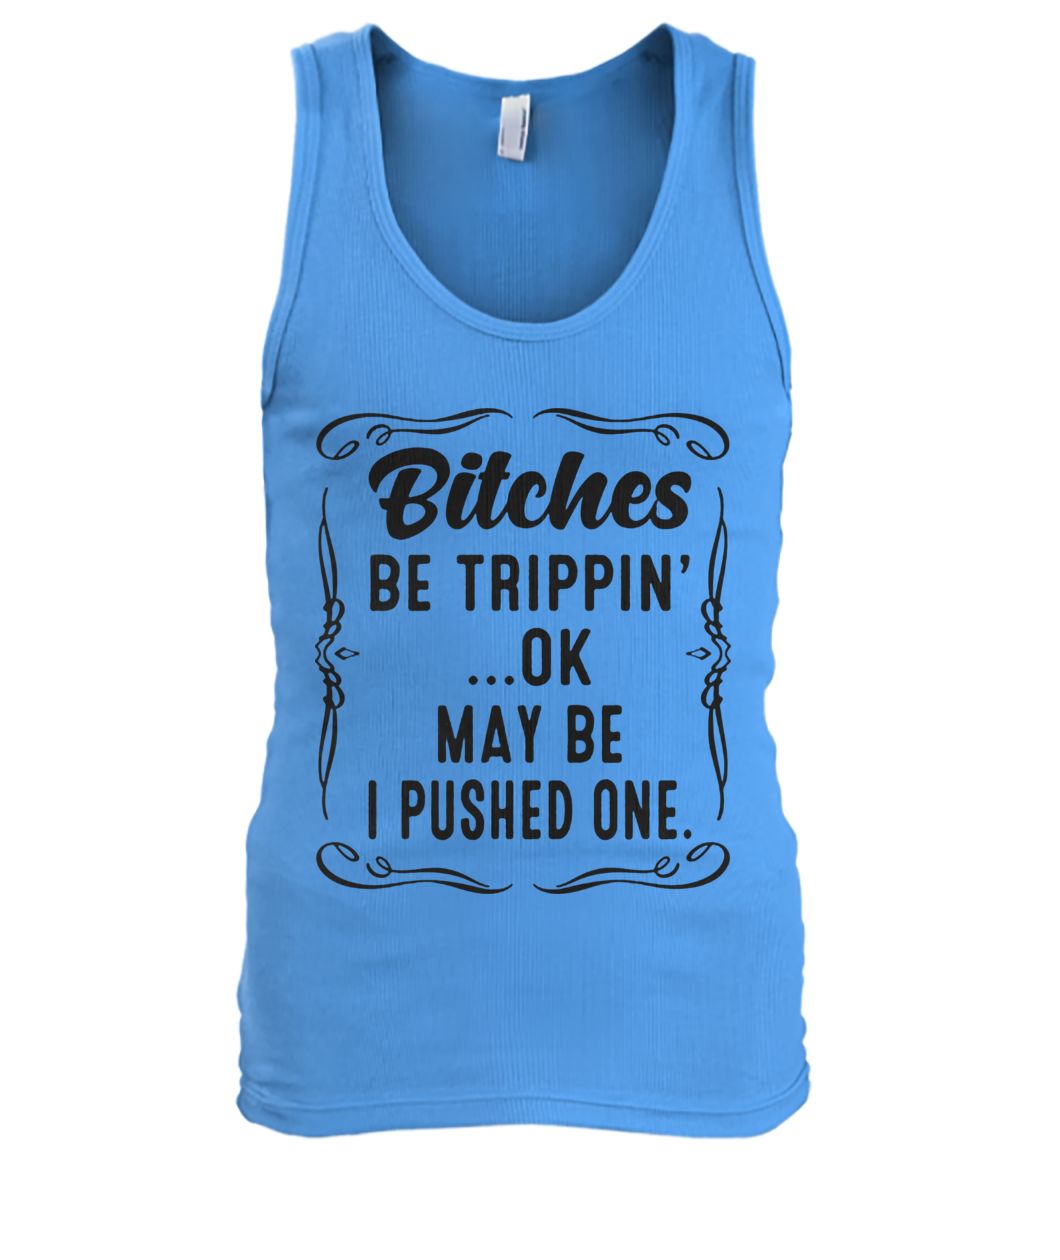 Bitches be trippin' maybe I pushed one men's tank top